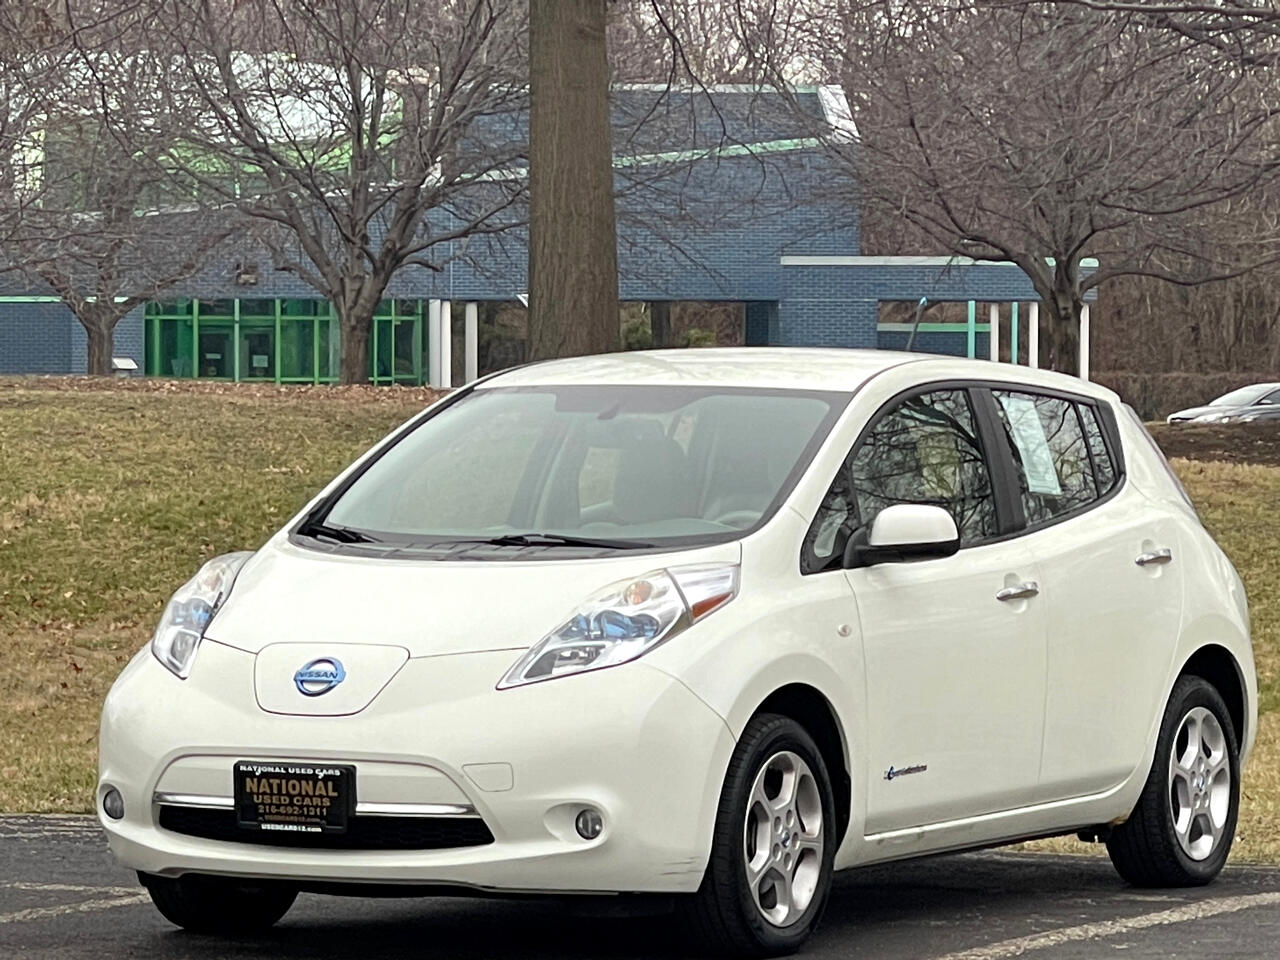 Used 2012 Nissan Leaf SL for Sale in Cleveland OH 44110 National Used Cars,  Inc